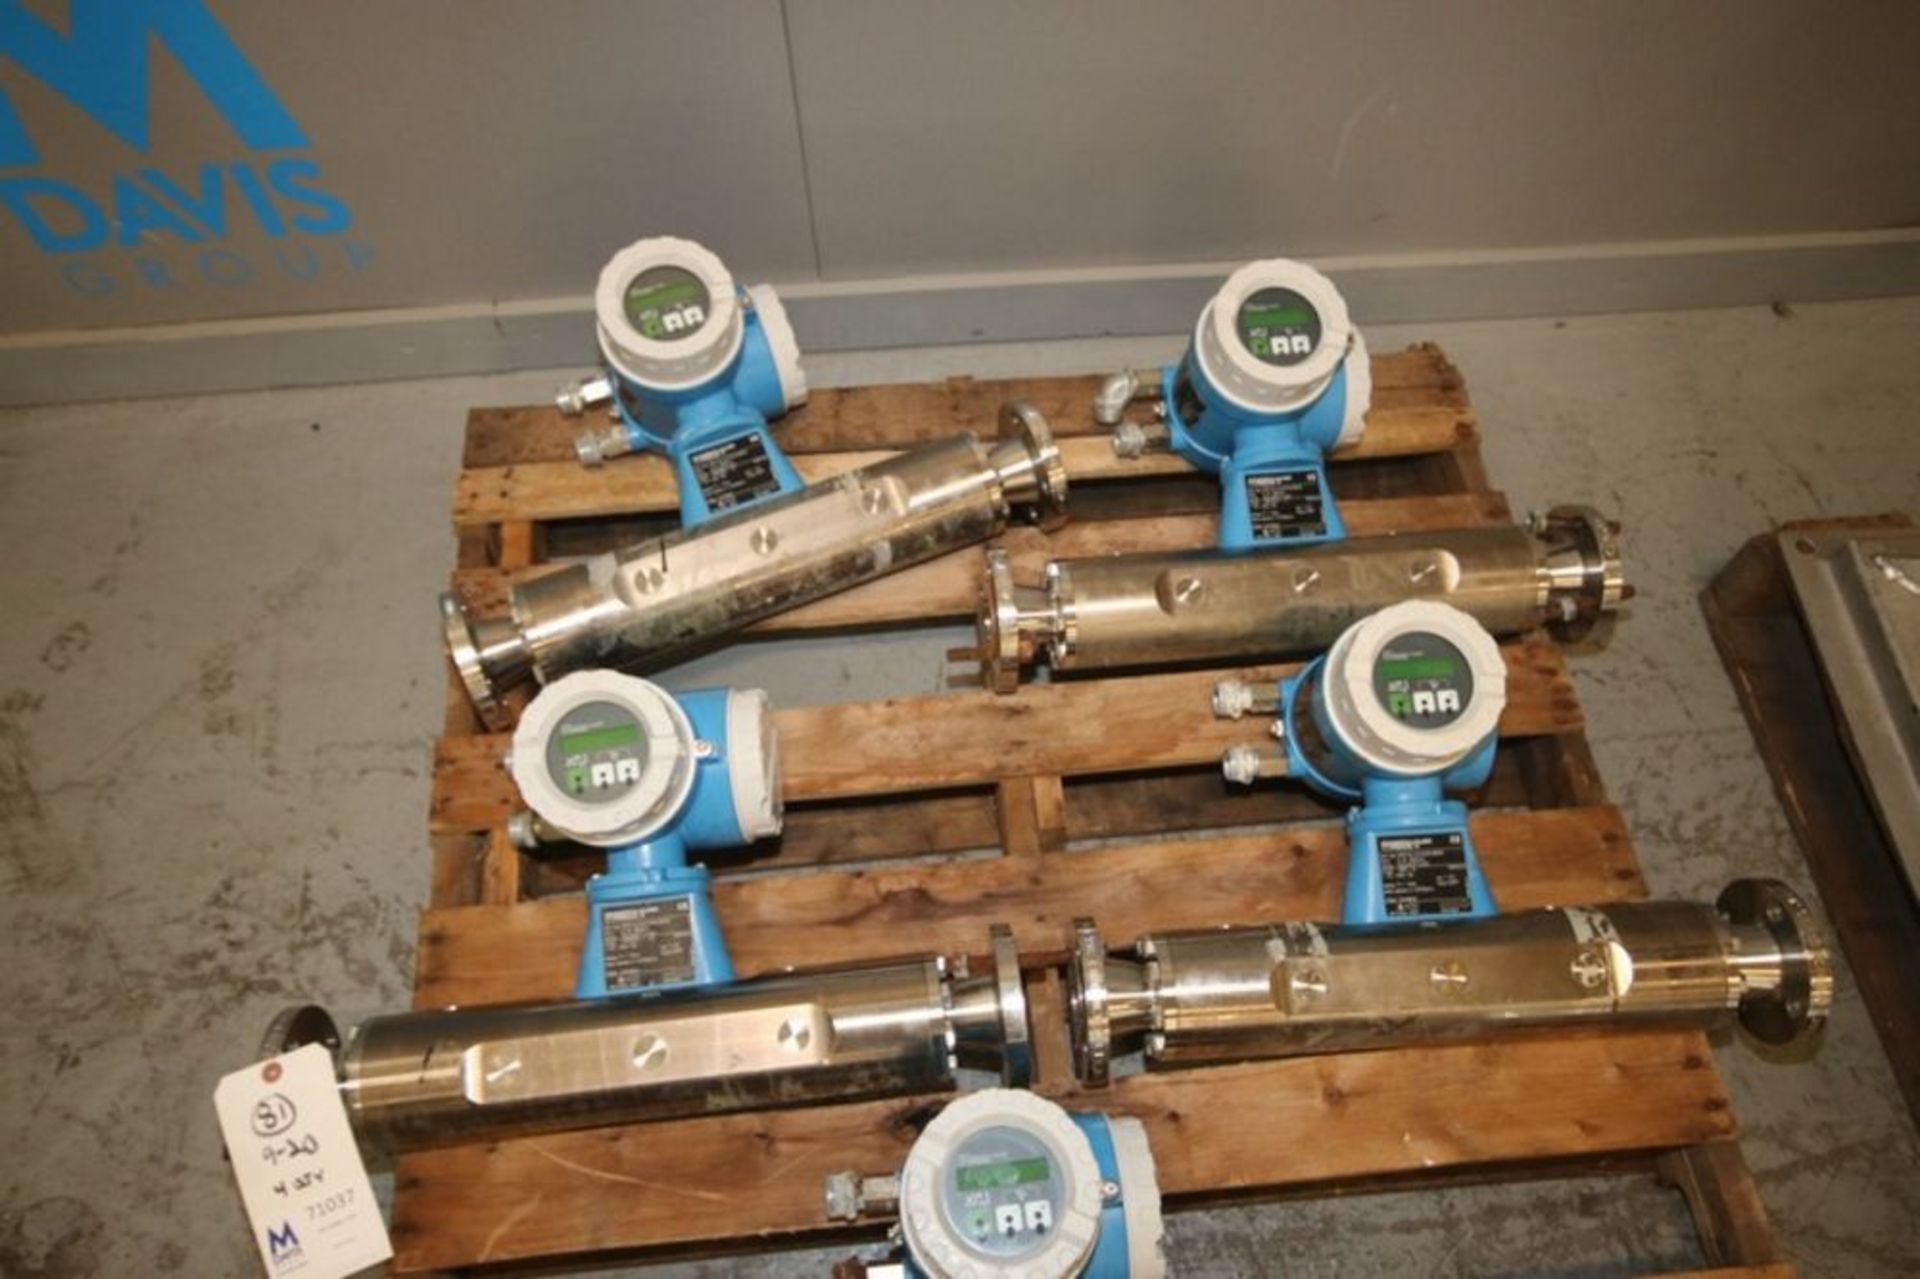 Endress+Hauser PROMASS S/S Flow Meters, Order Code: 63MT80-SAA00A25B1W, with 3" S/S Bolt Type